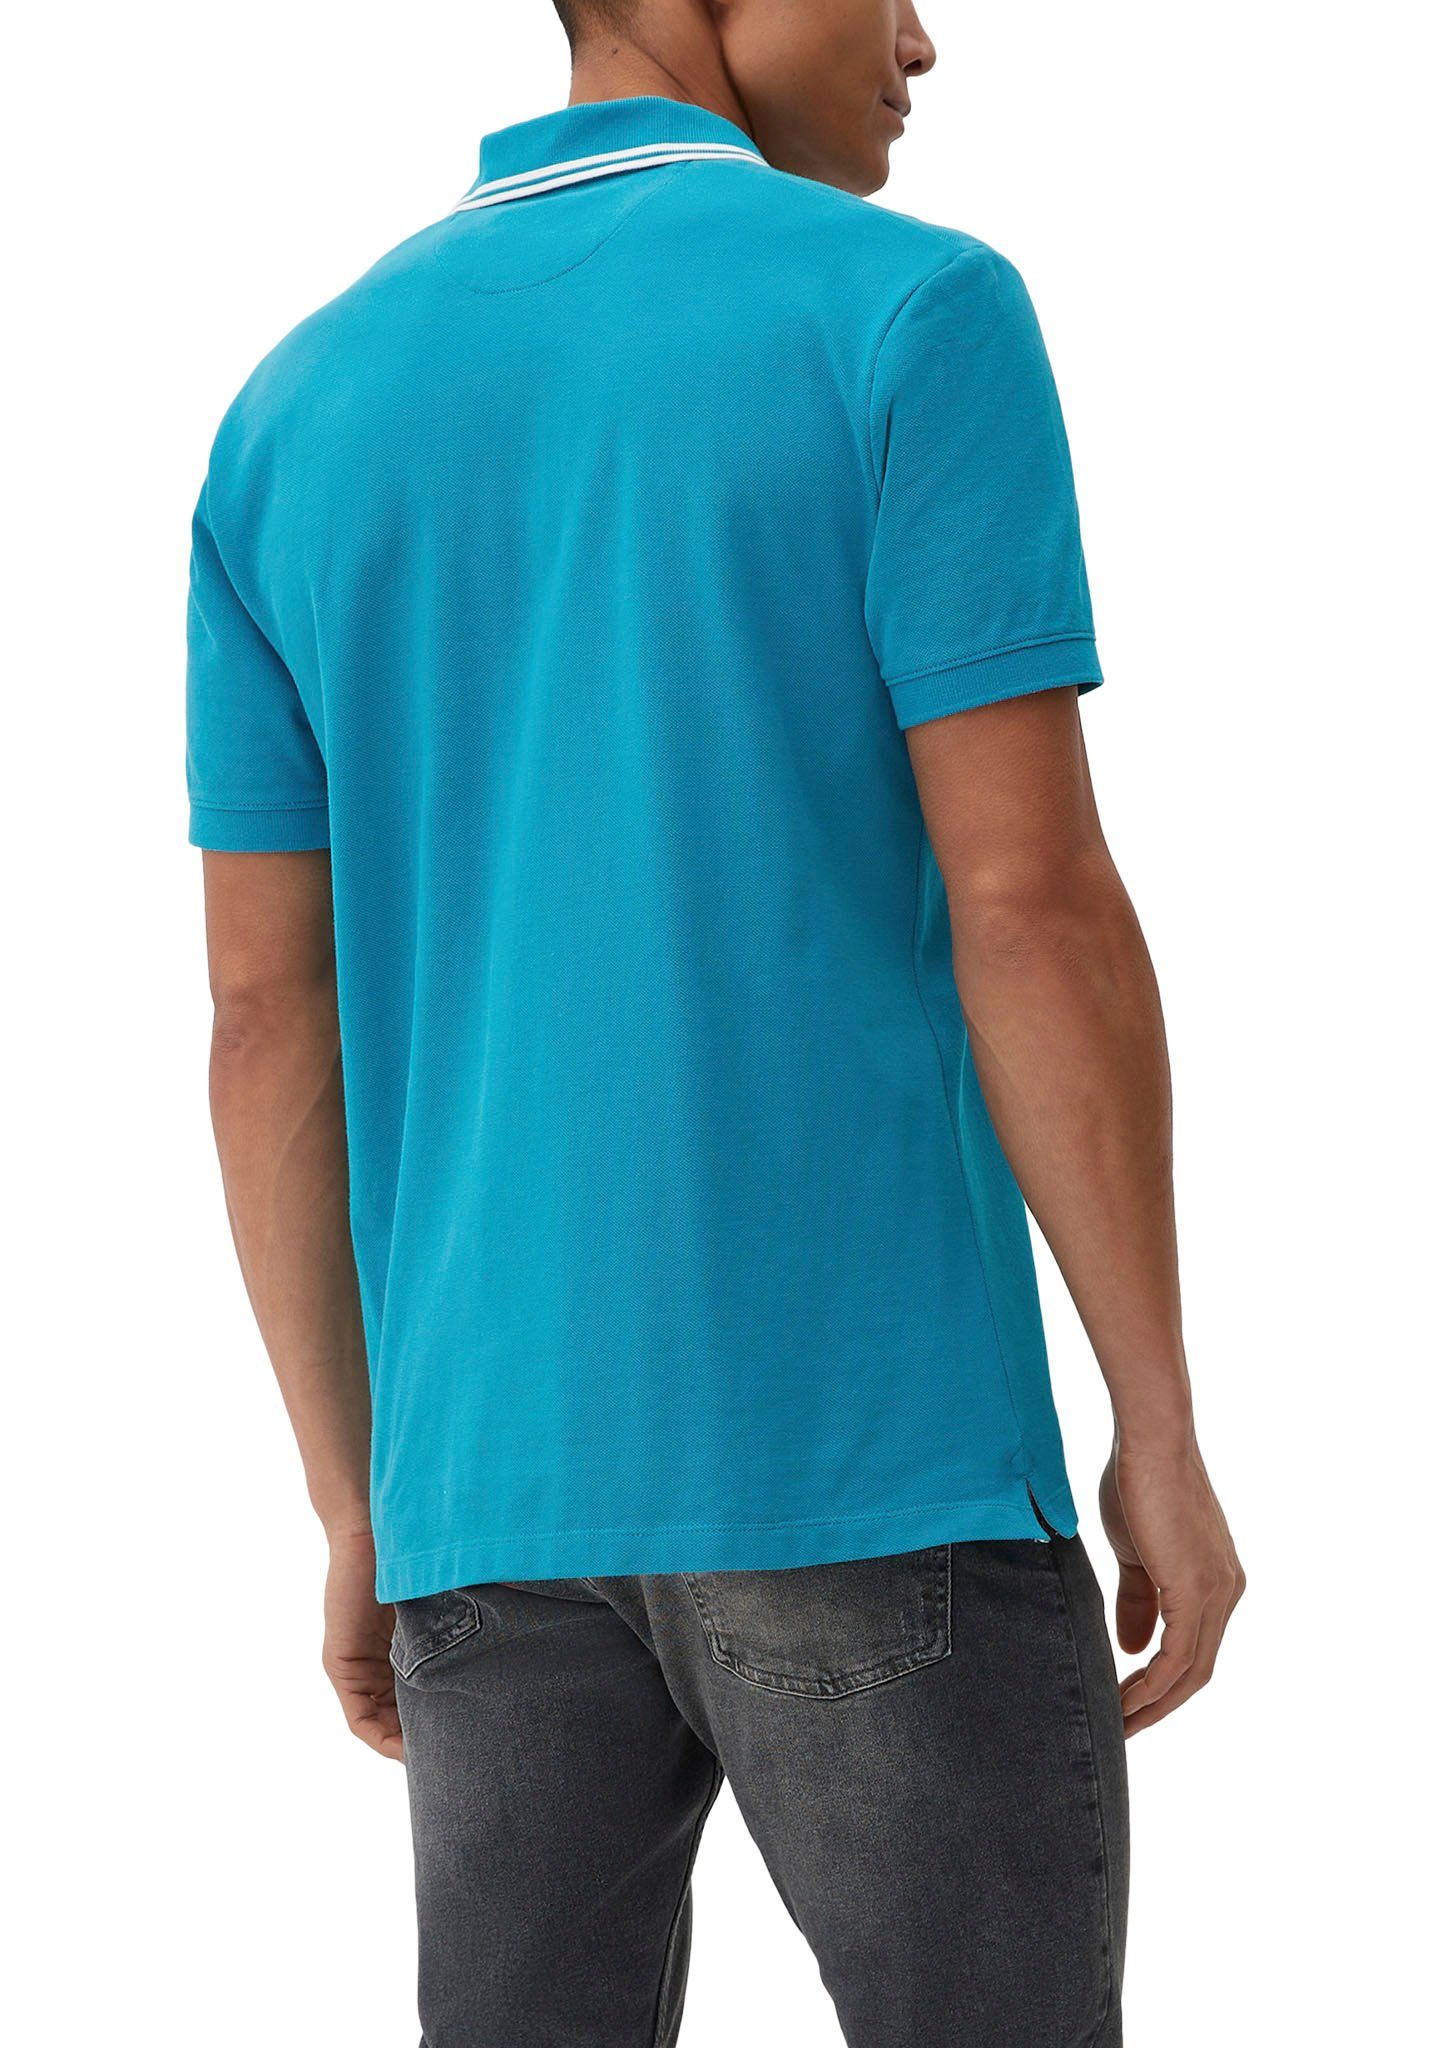 mit Poloshirt blue s.Oliver Labelpatch green